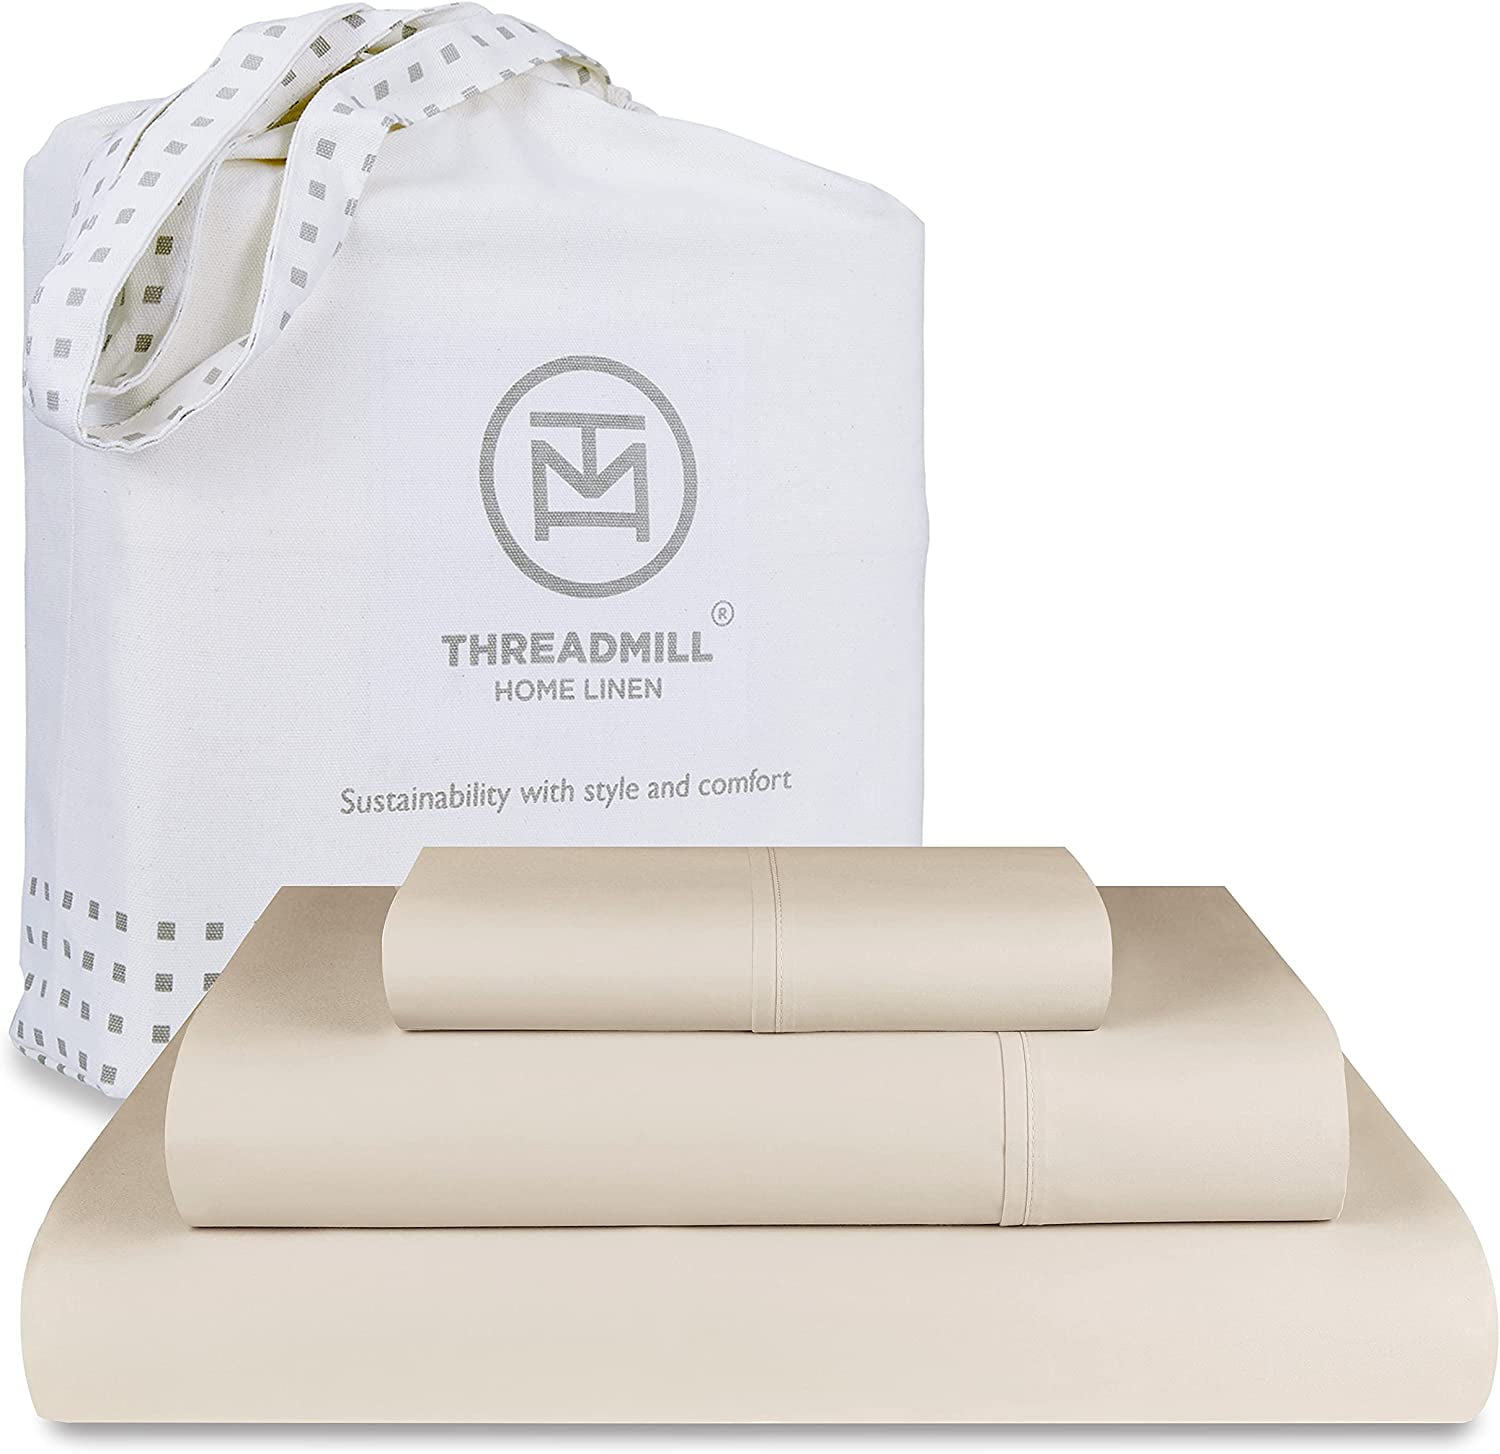 Beige Hem Stitch Luxury Soft and Smooth Threadmill Home Linen 600 Thread Count 100% Cotton Pillow Cases Solid Sateen Set of 2 Cotton Standard Pillowcases